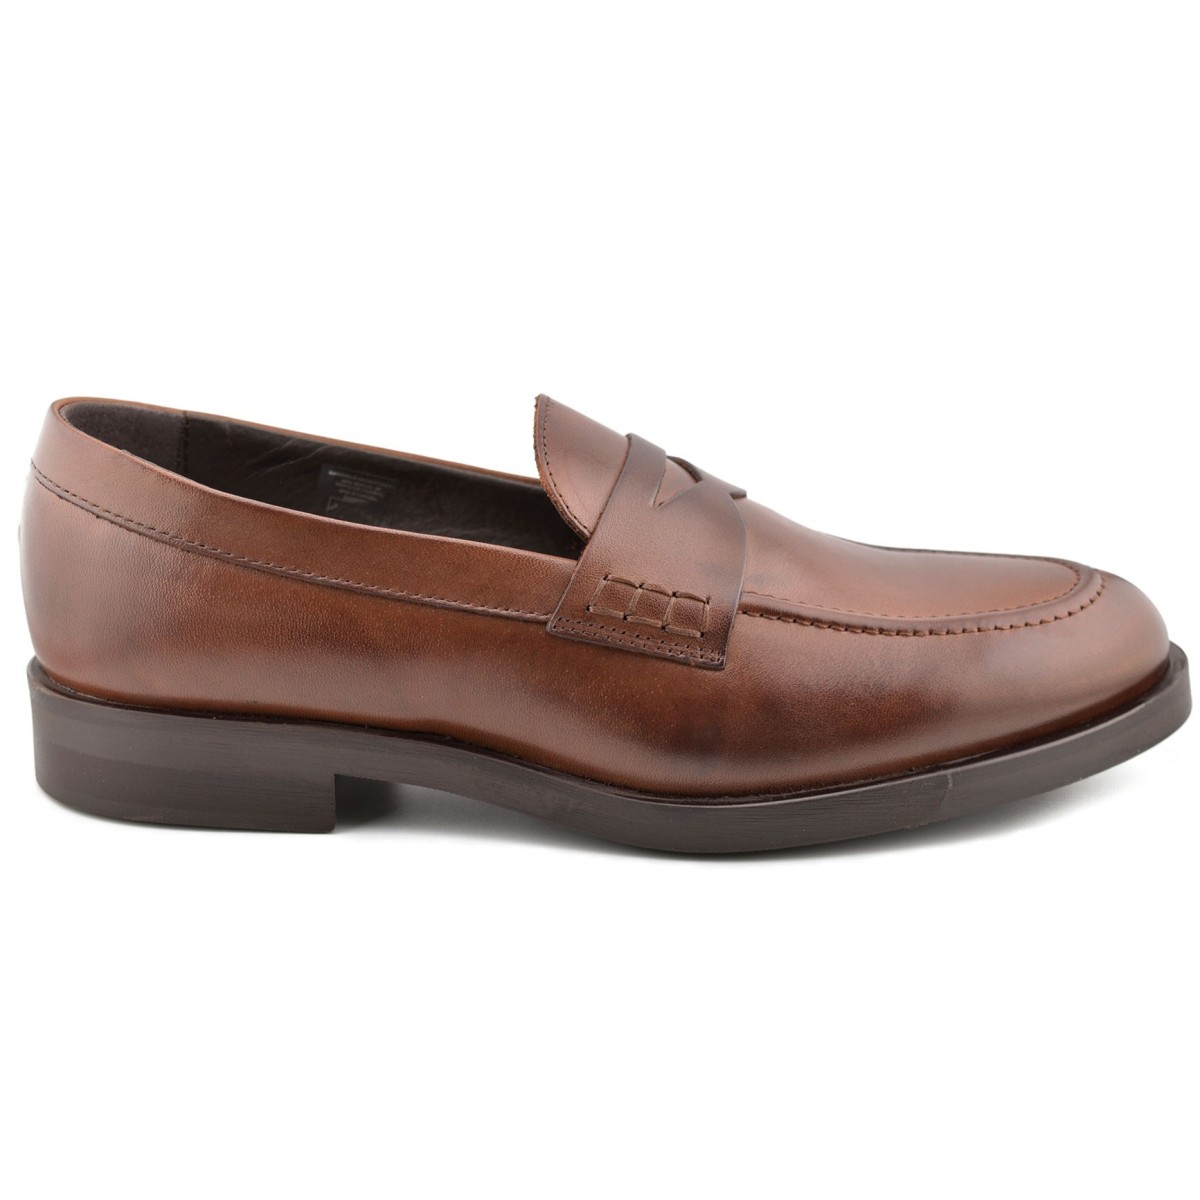 Brown leather moccasins shoes by Casual